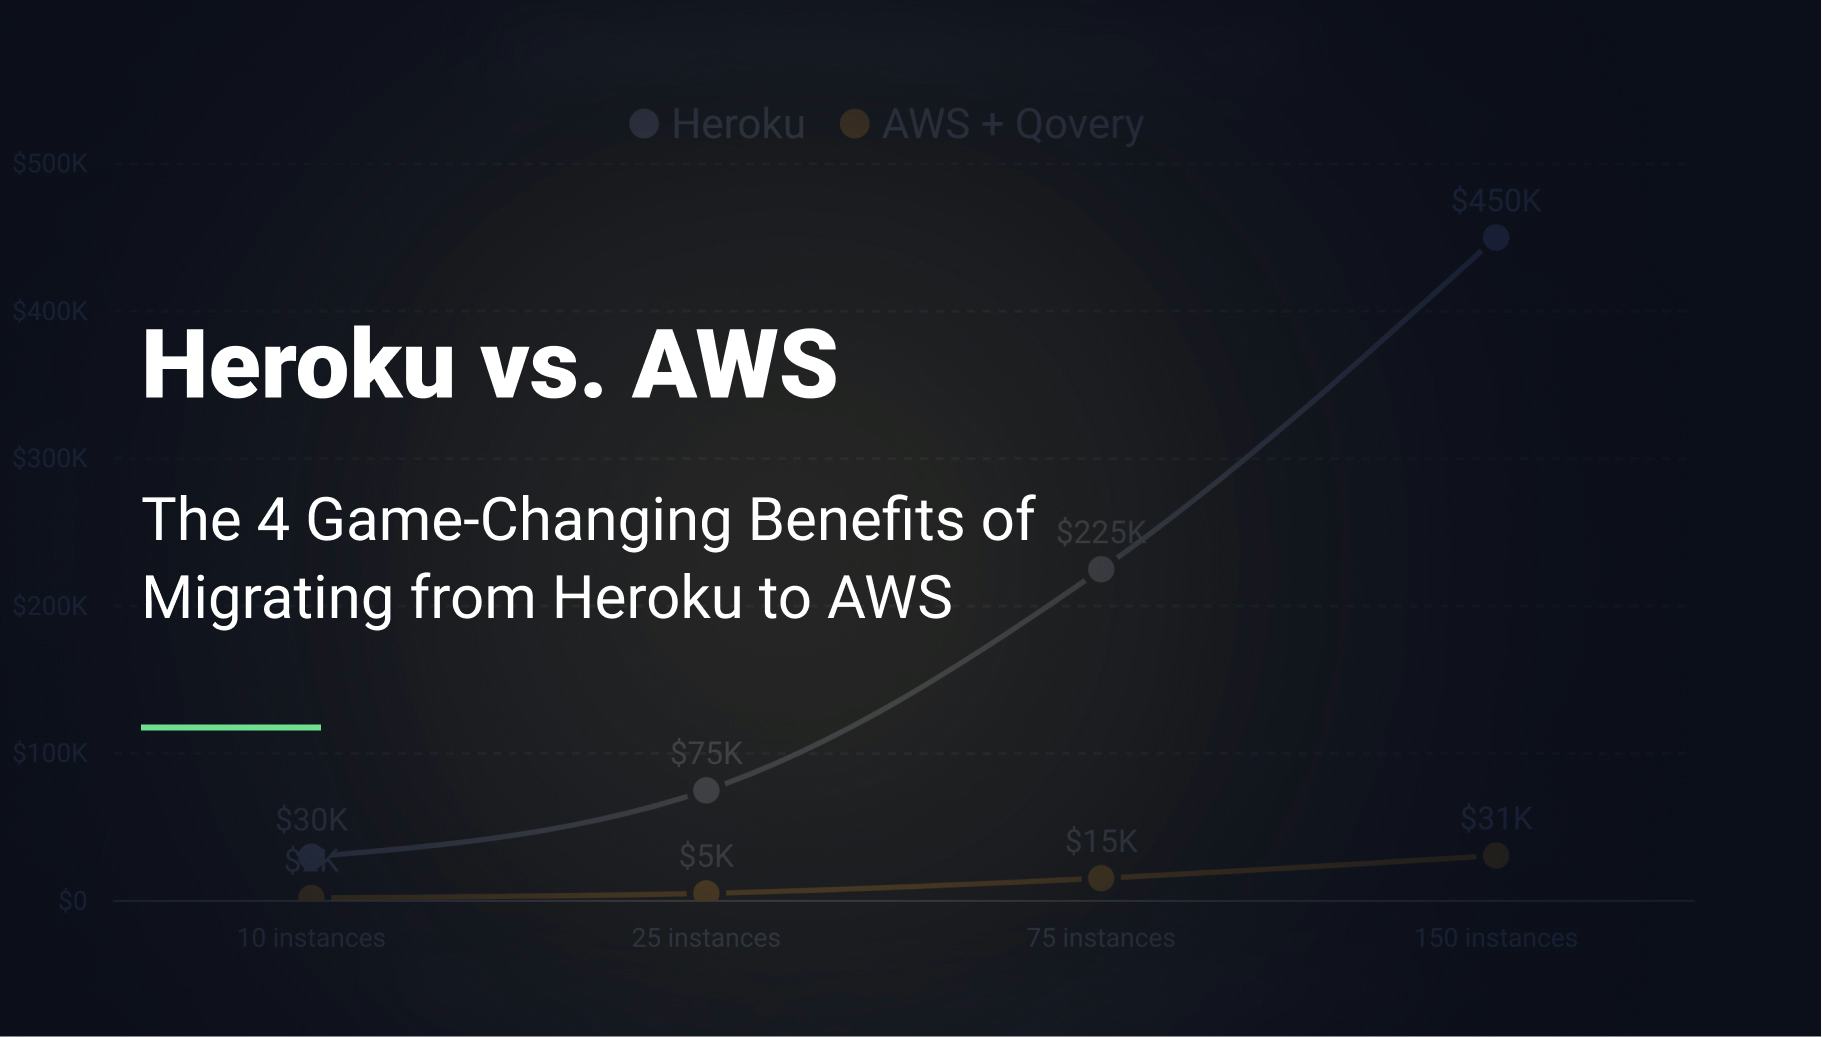 The 4 Game-Changing Benefits of Migrating from Heroku to AWS - Qovery